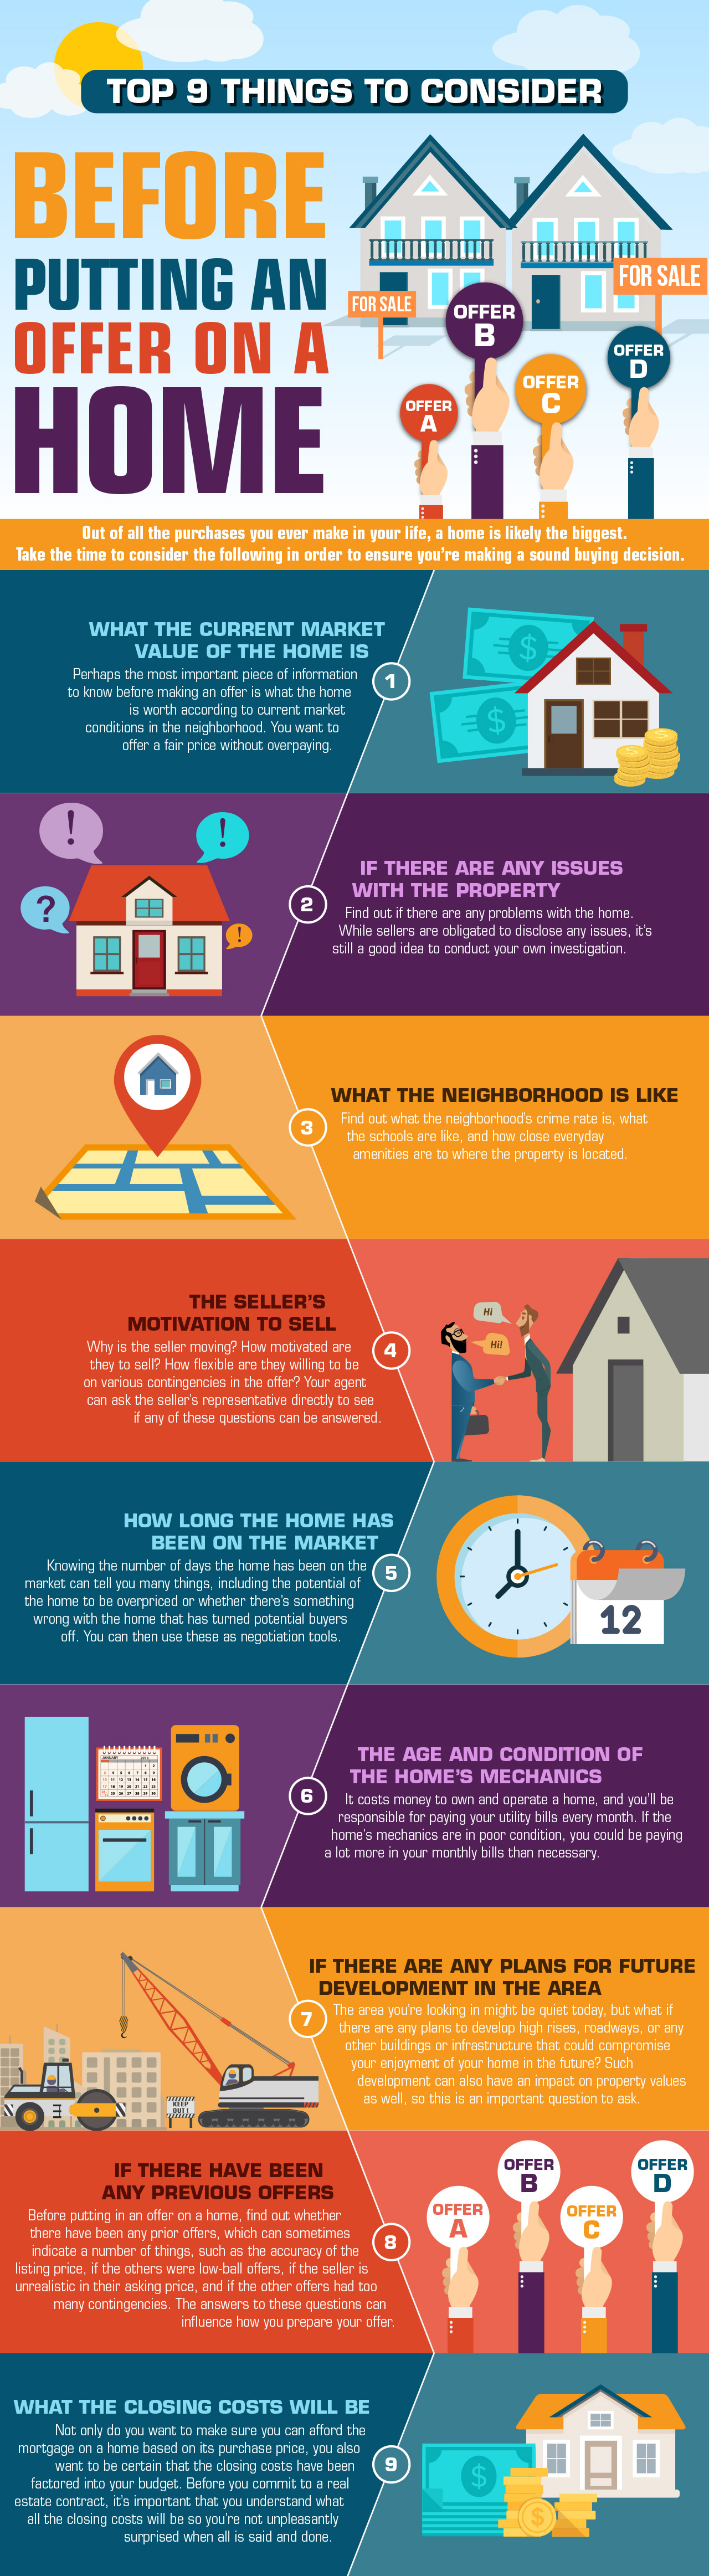 top-9-things-to-consider-before-putting-an-offer-on-a-home-infographic